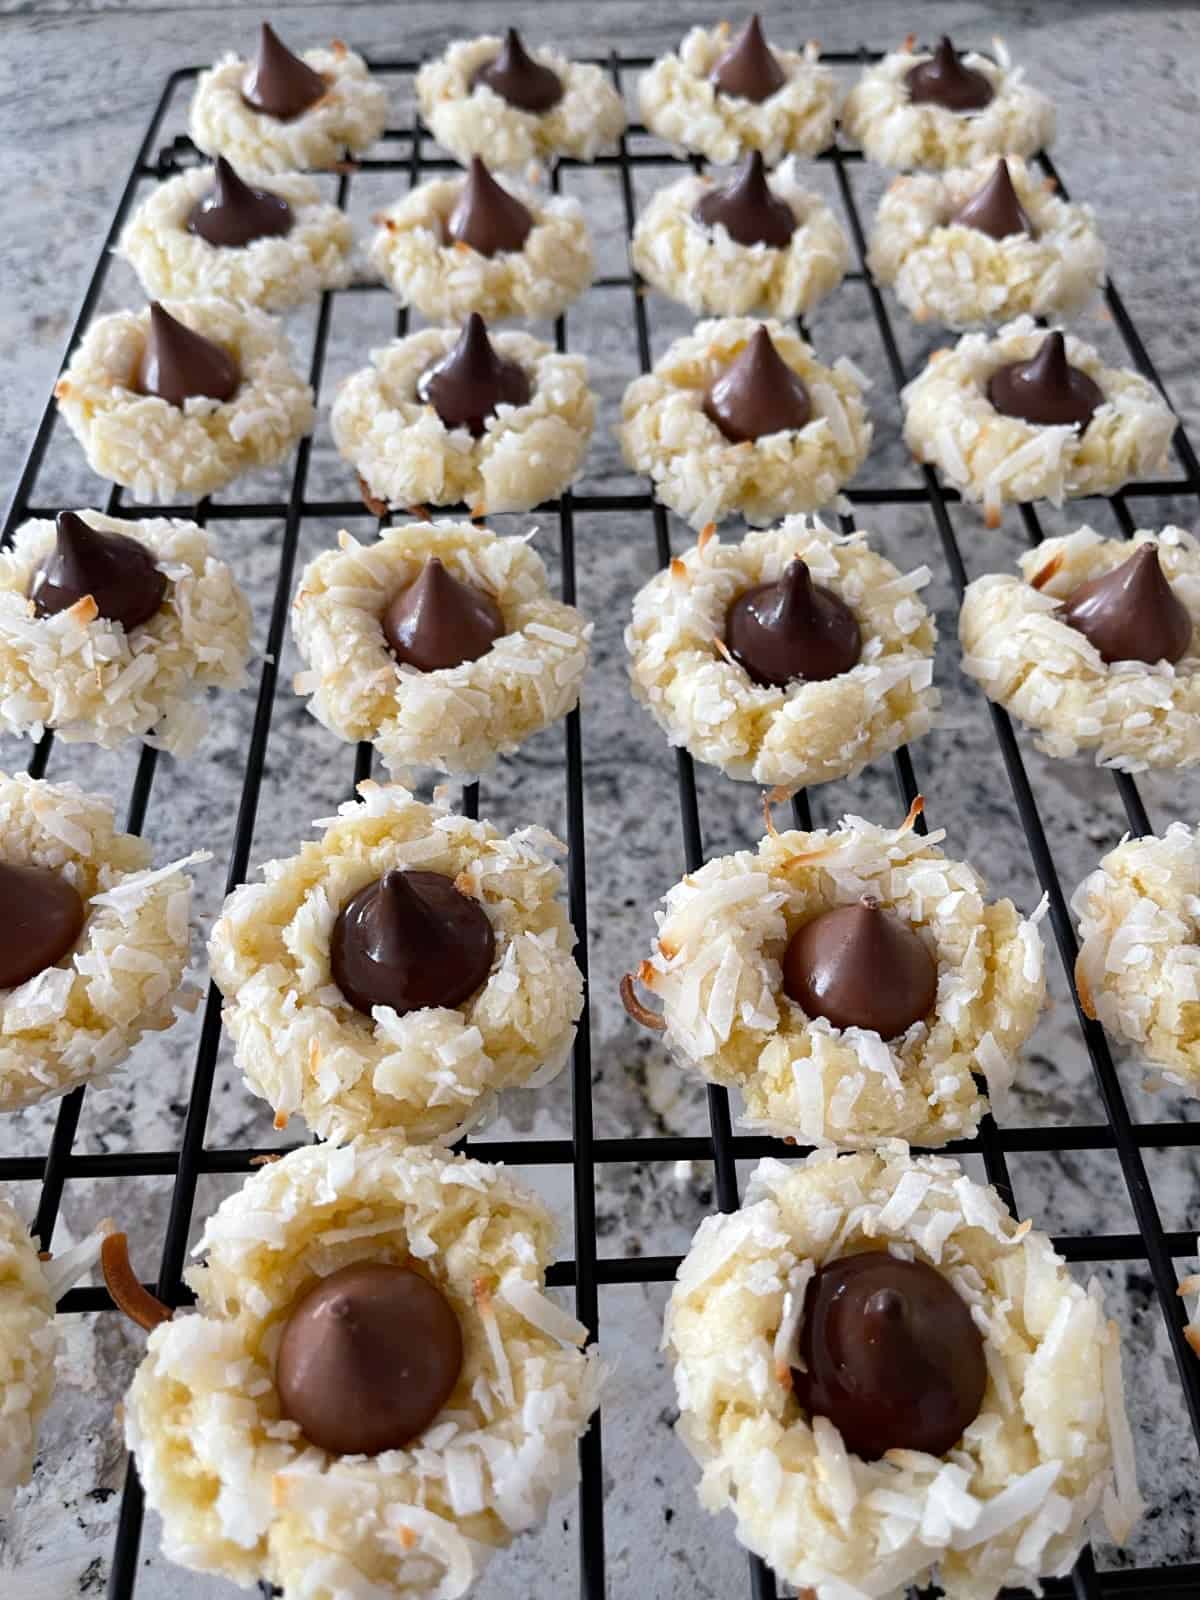 Coconut macaroon kiss cookies cooling on wire rack.